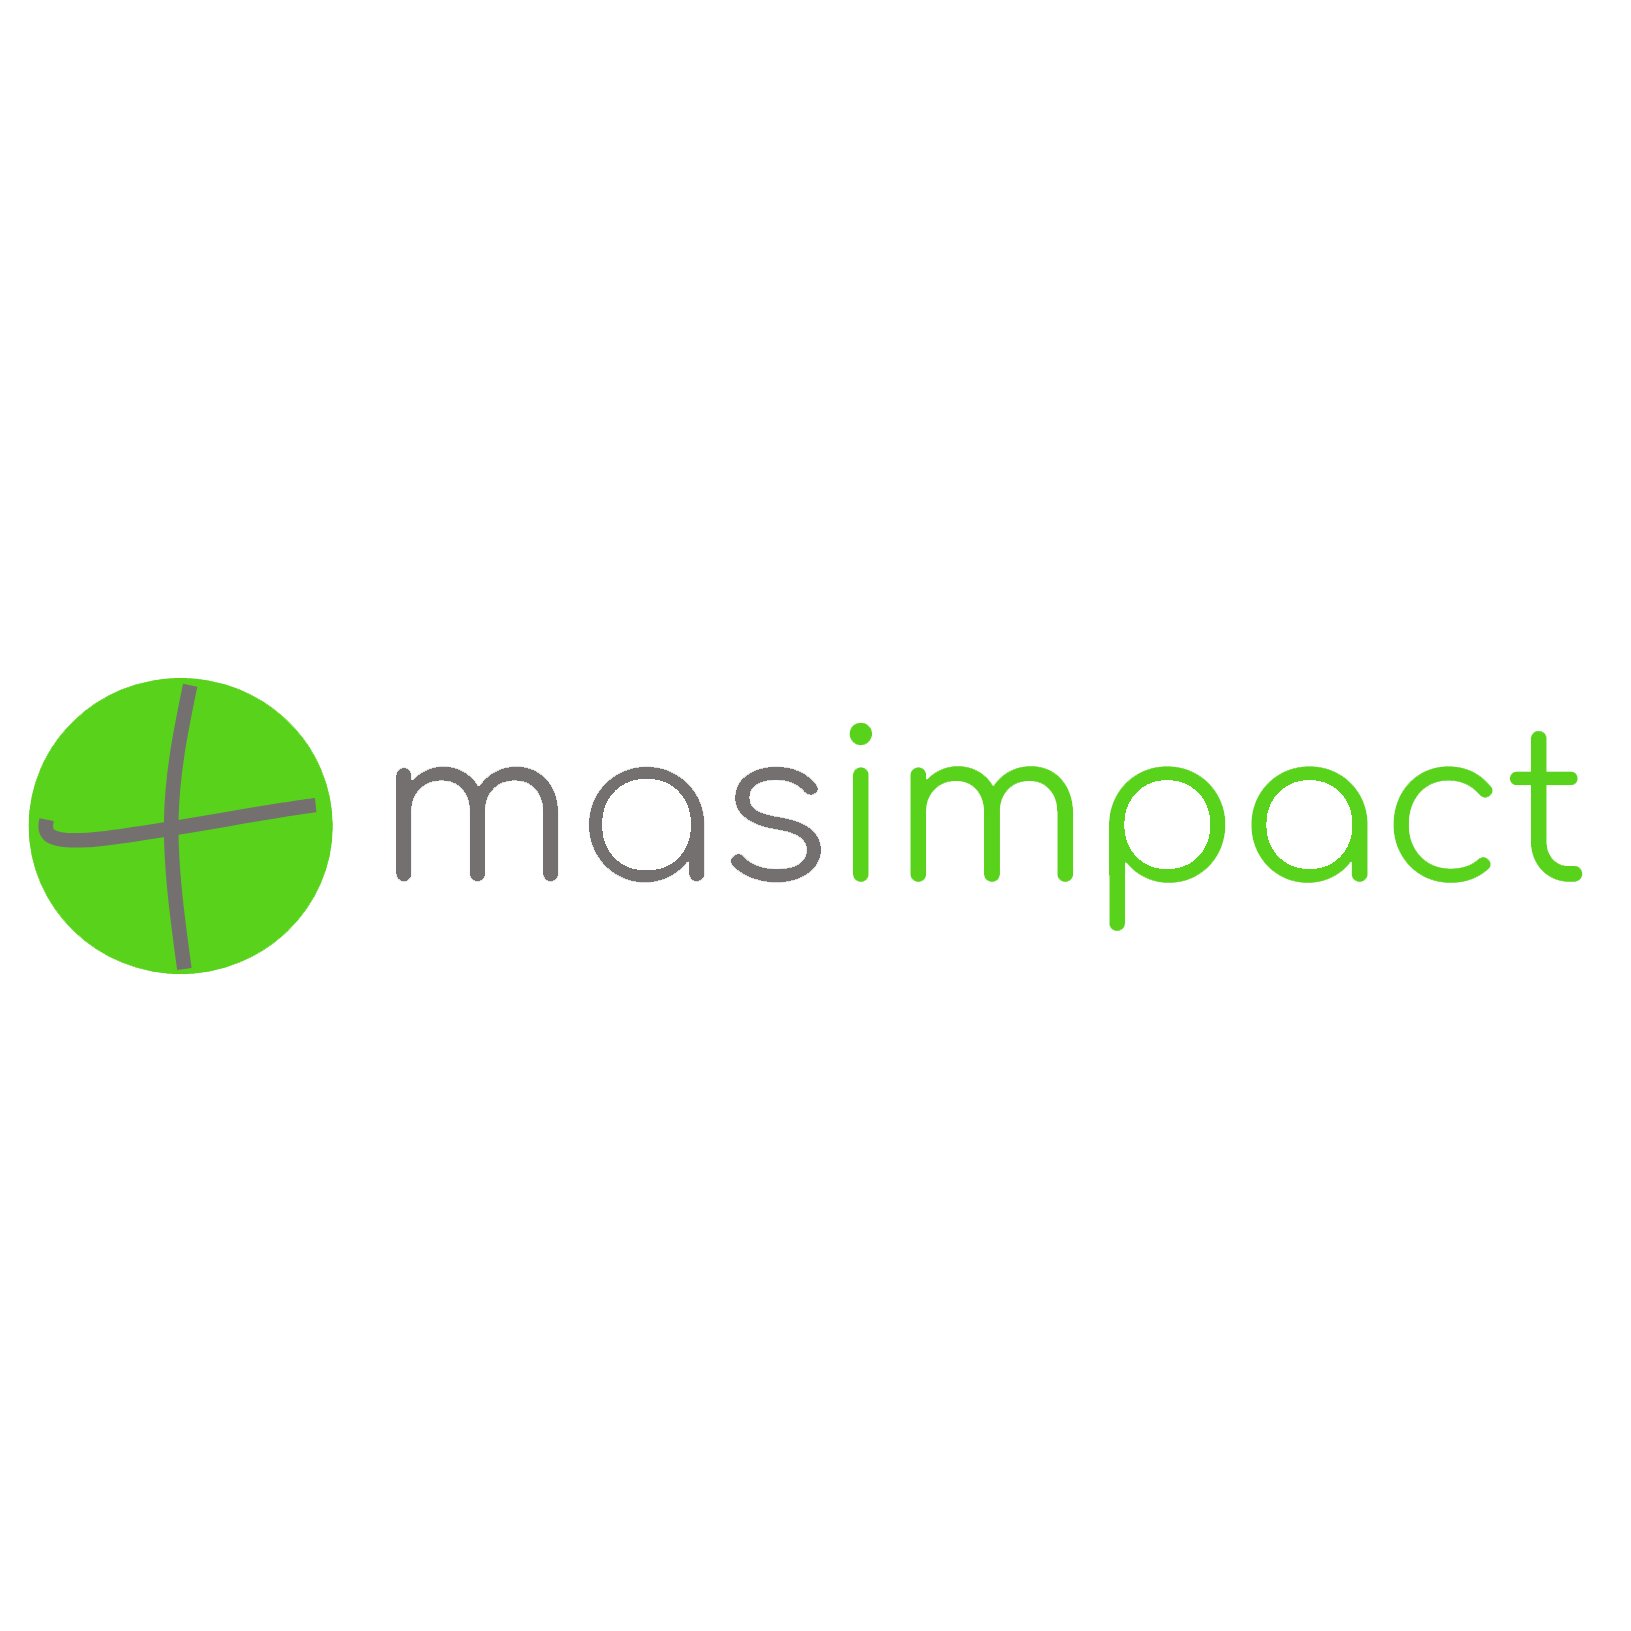 In masimpact we are committed with the standardisation of social impact measurement. Helping organisations measure, manage and report their social impact.